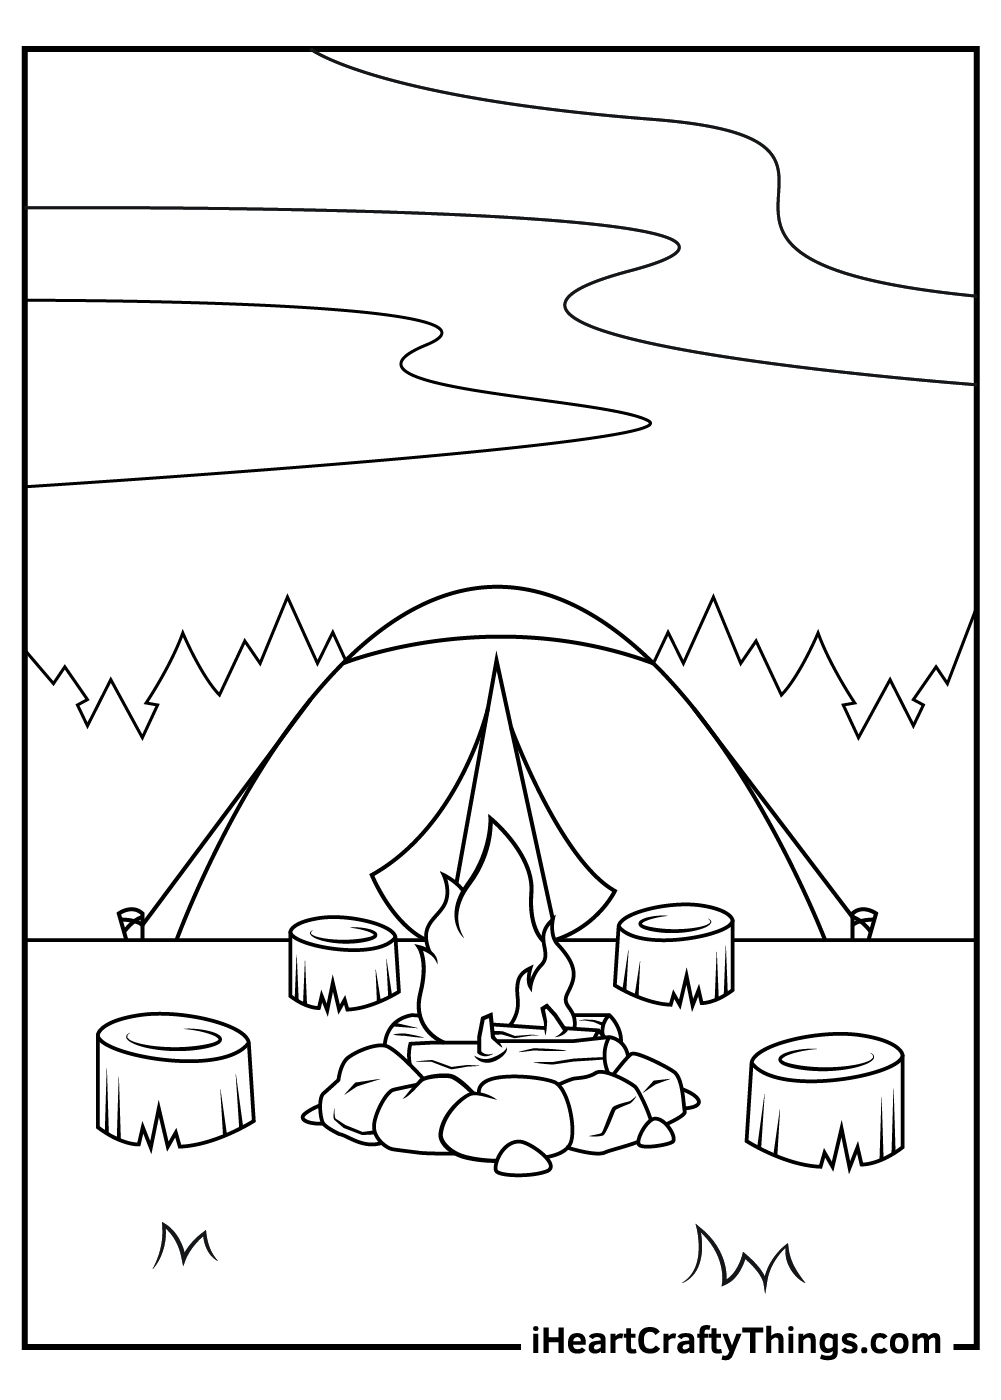 Camping Coloring Pages I Heart Crafty Things